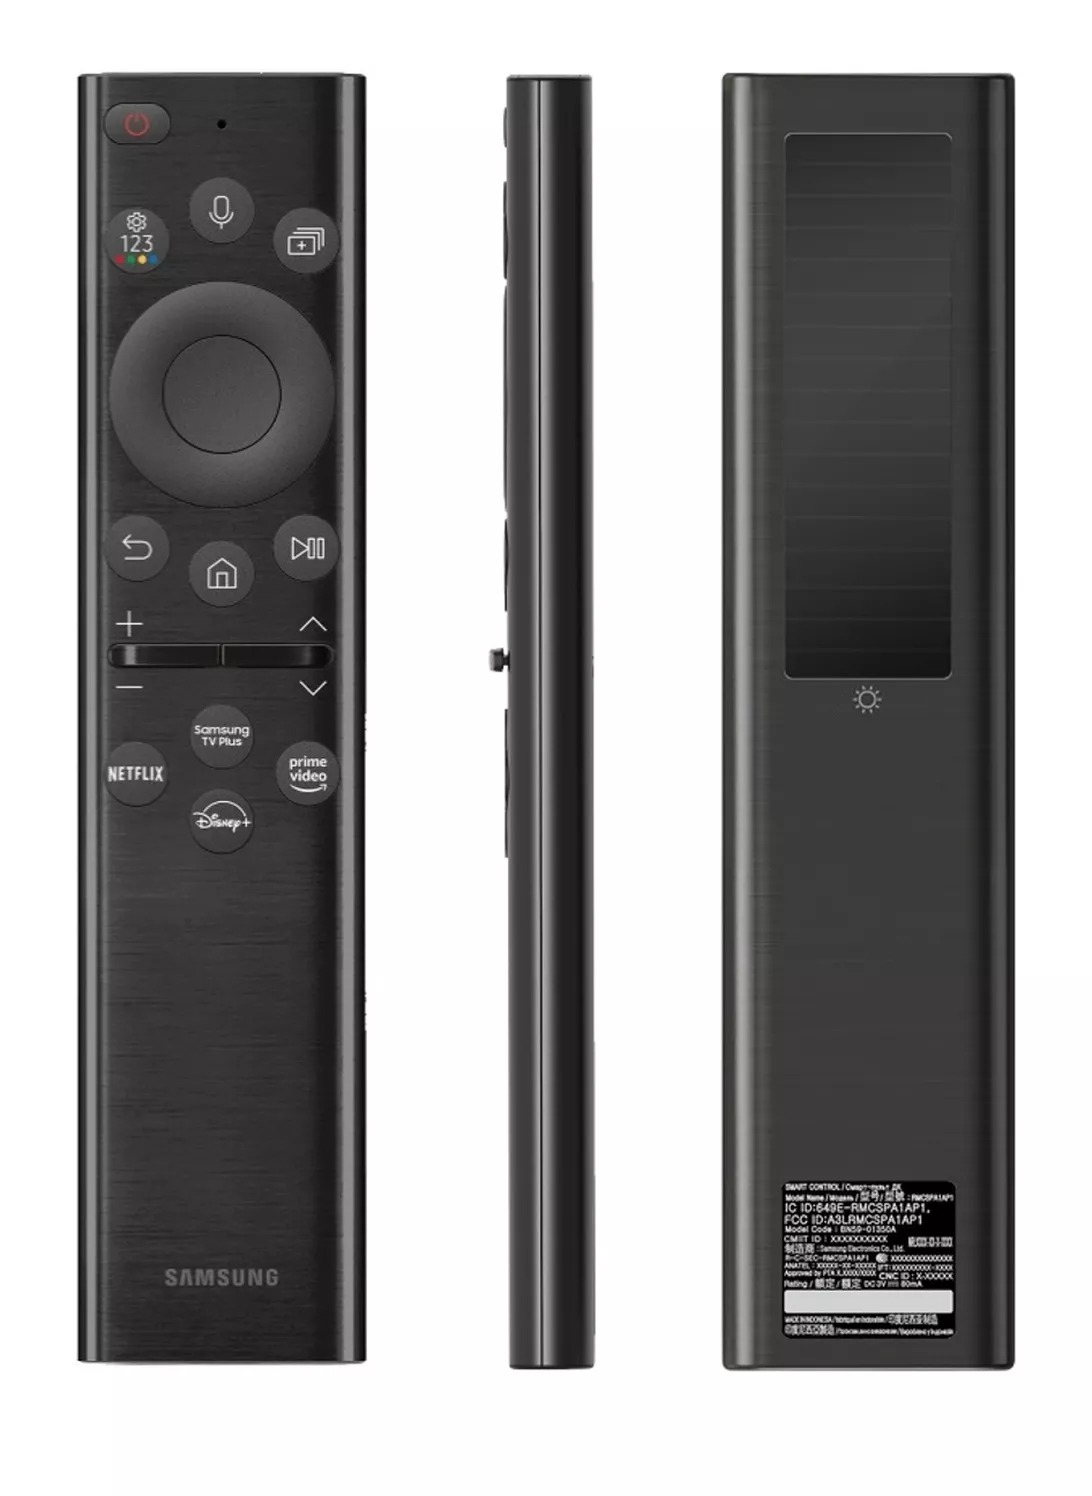 Samsung's new 2022 Eco Remote for TVs.